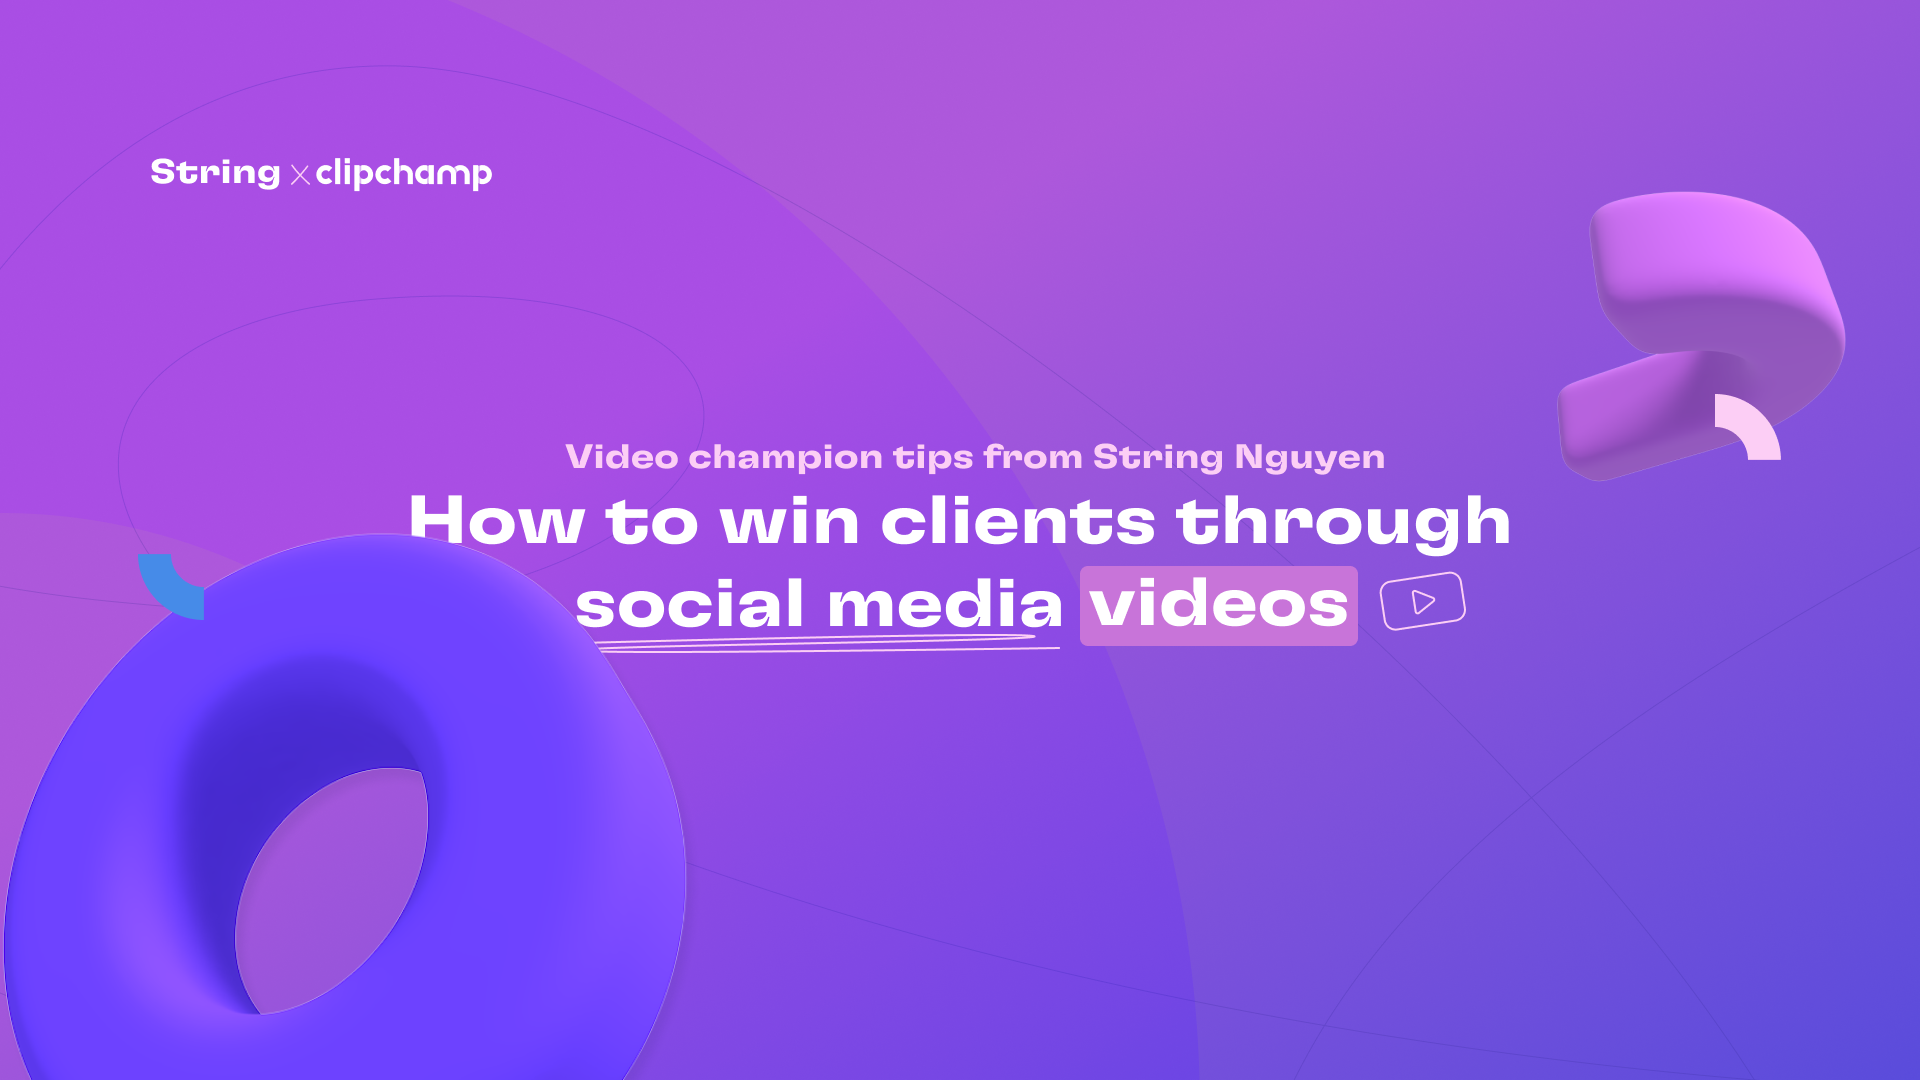 How to win clients through social media videos - Clipchamp x String